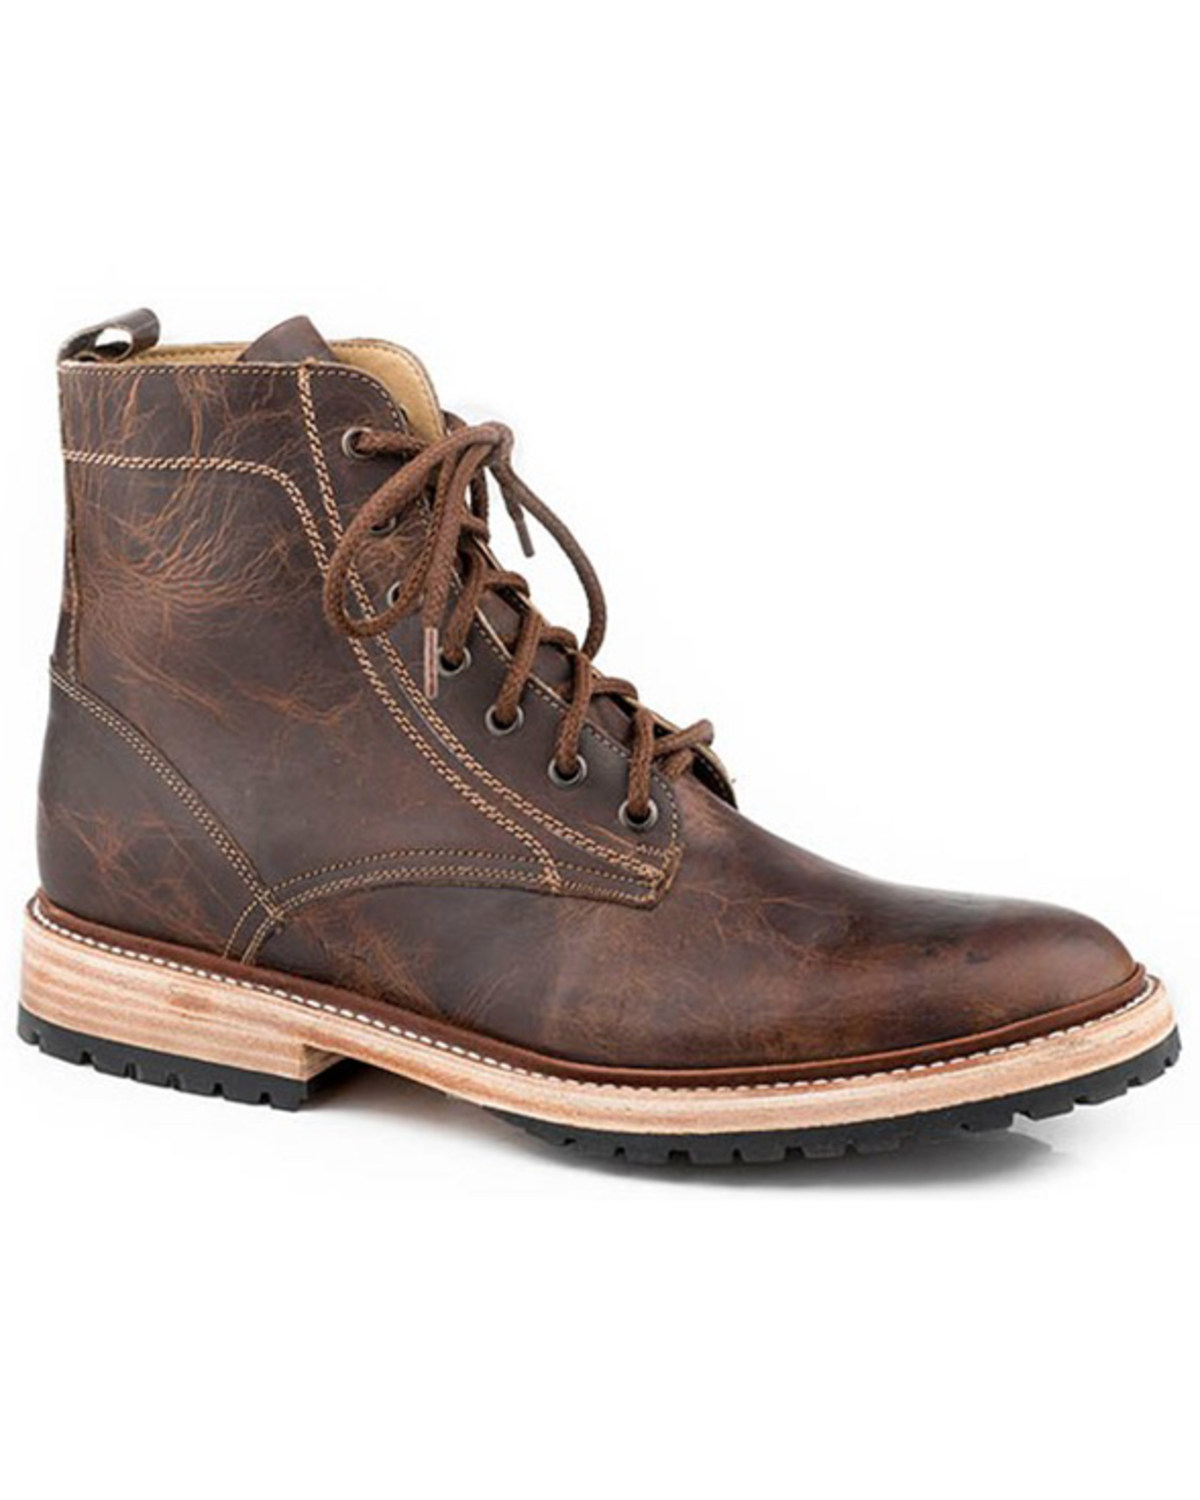 Stetson Men's Oiled Vamp Casual Lace-Up Chukka Boots - Round Toe